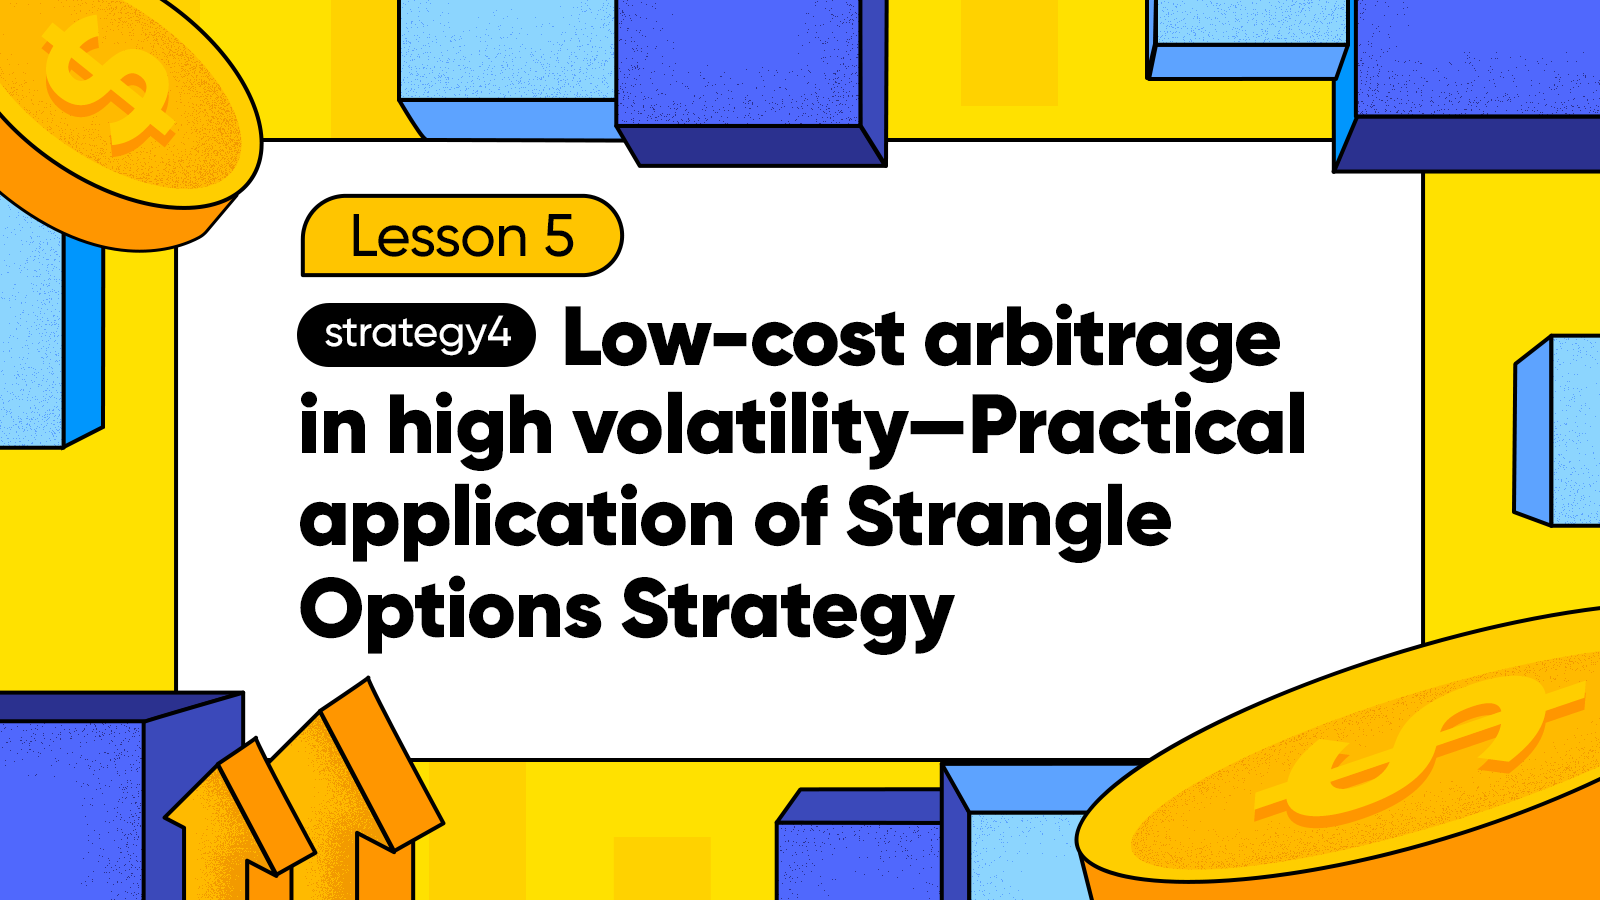 5.Practical Application of Strangle Options Strategy